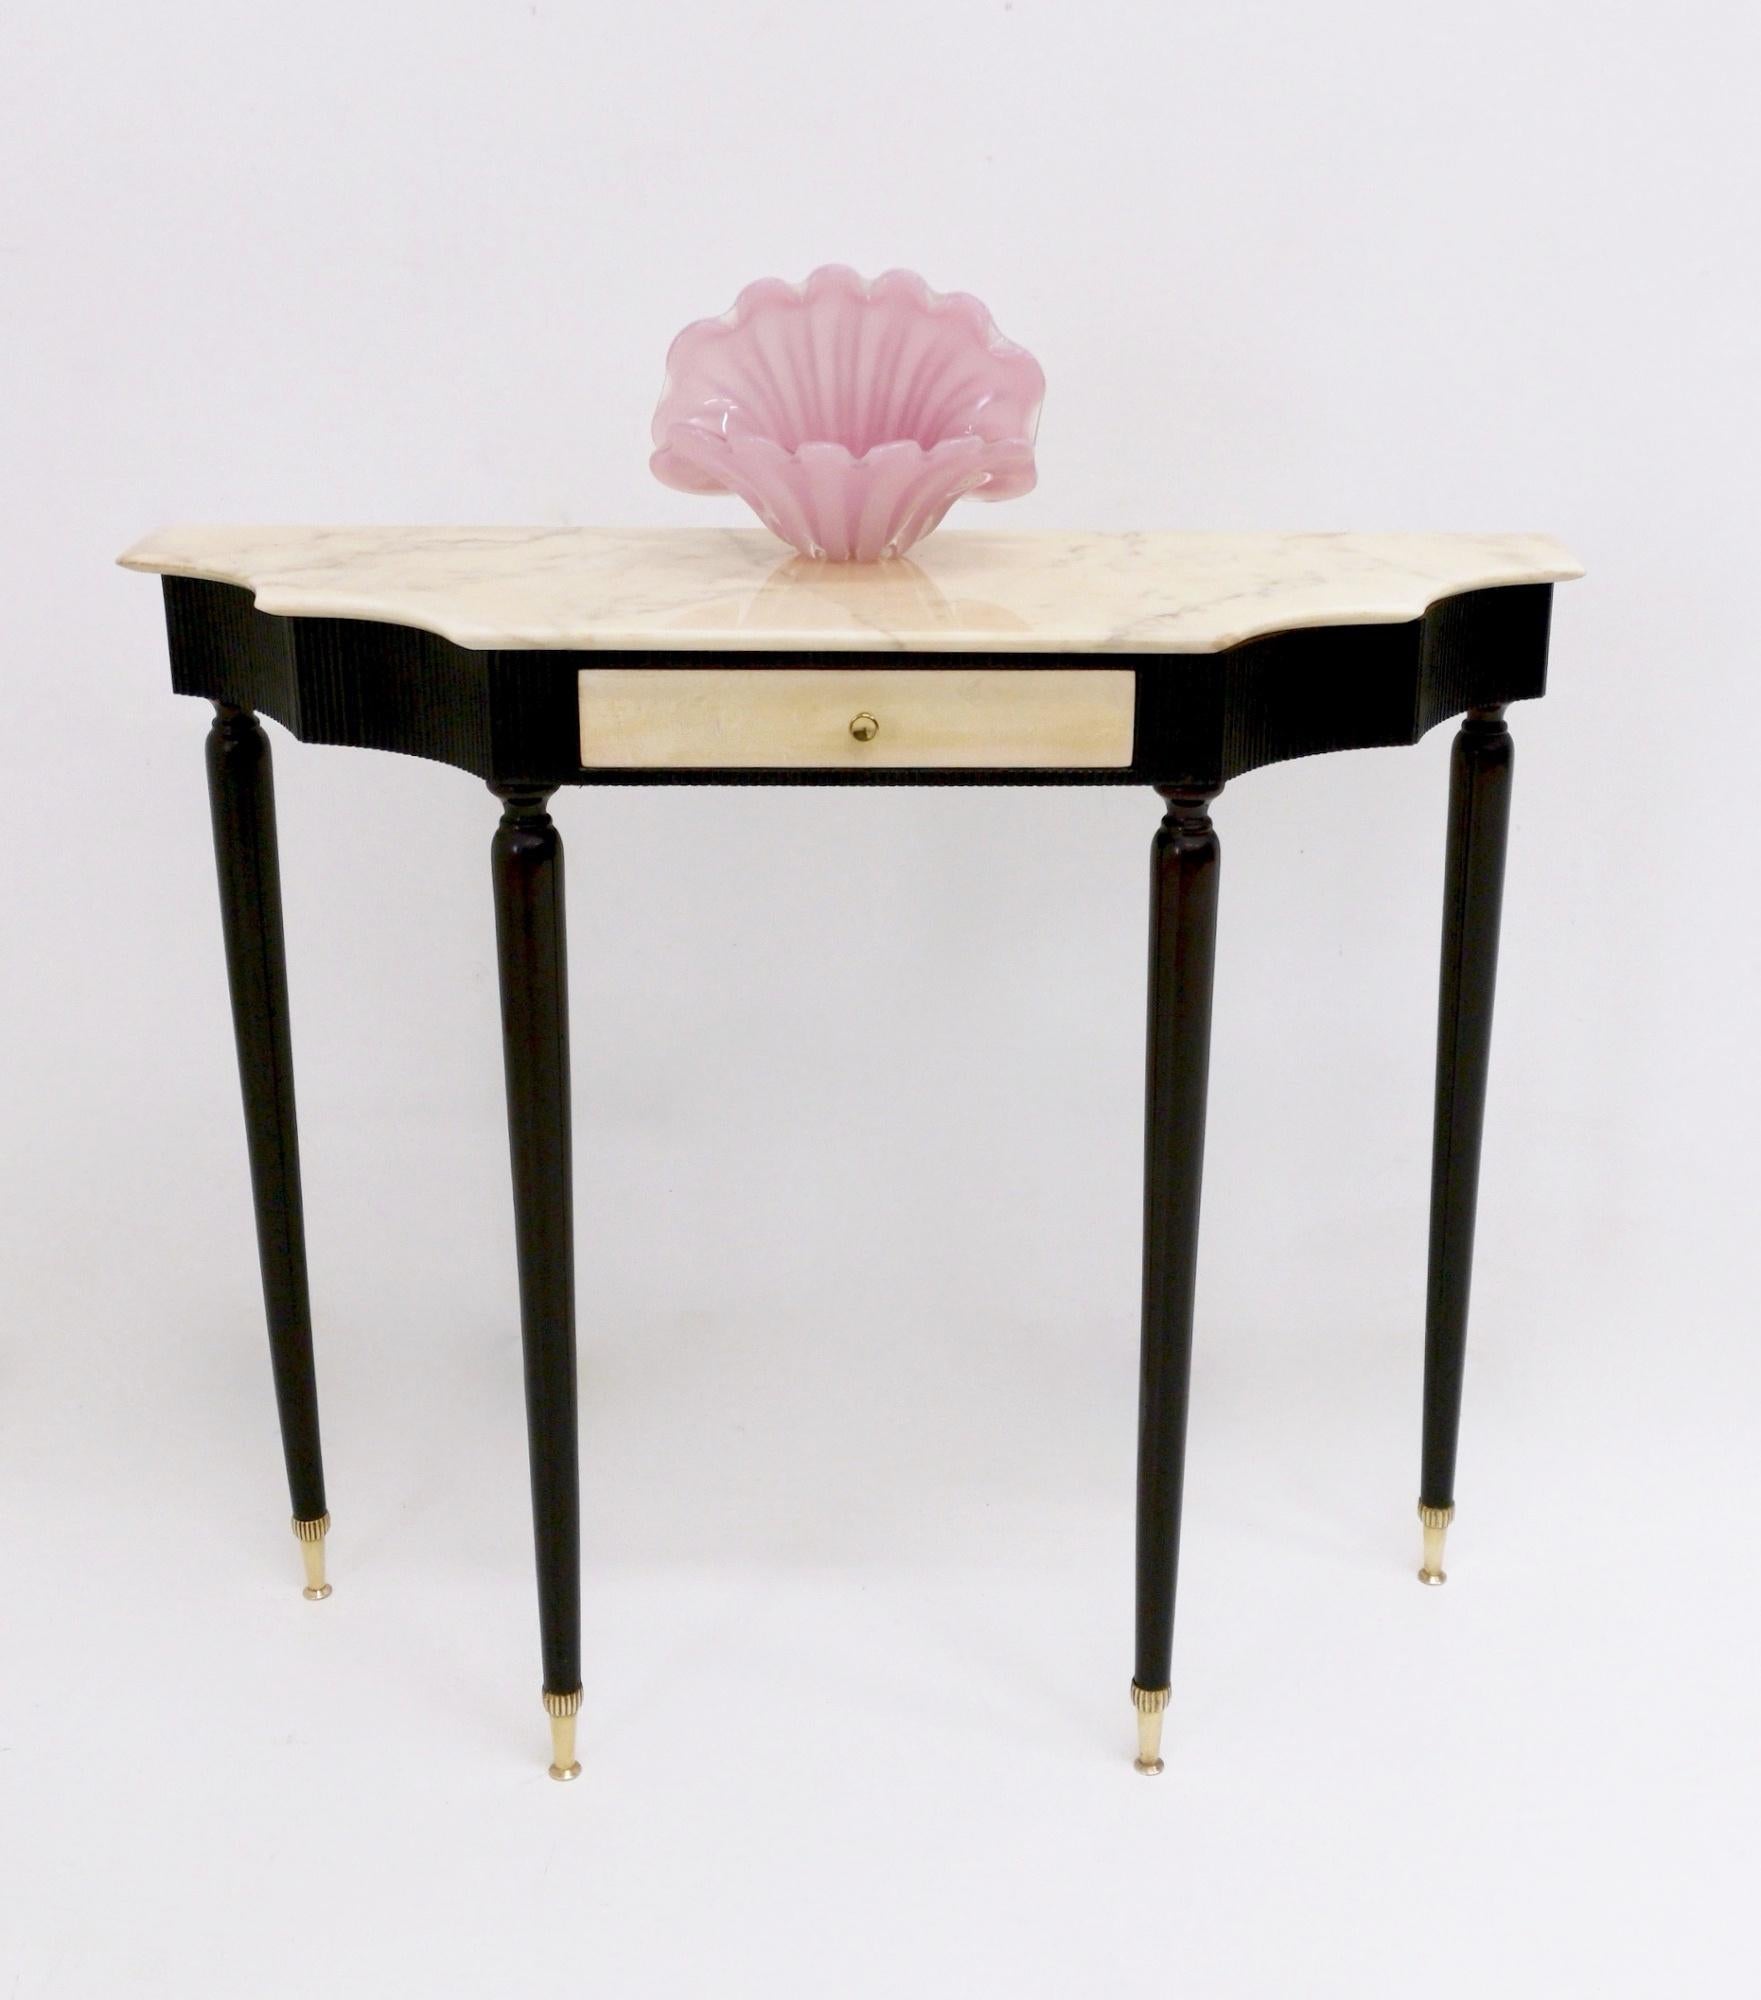 Italian Midcentury Ebonized Console Table with Portuguese Pink Marble Top, Italy, 1950s